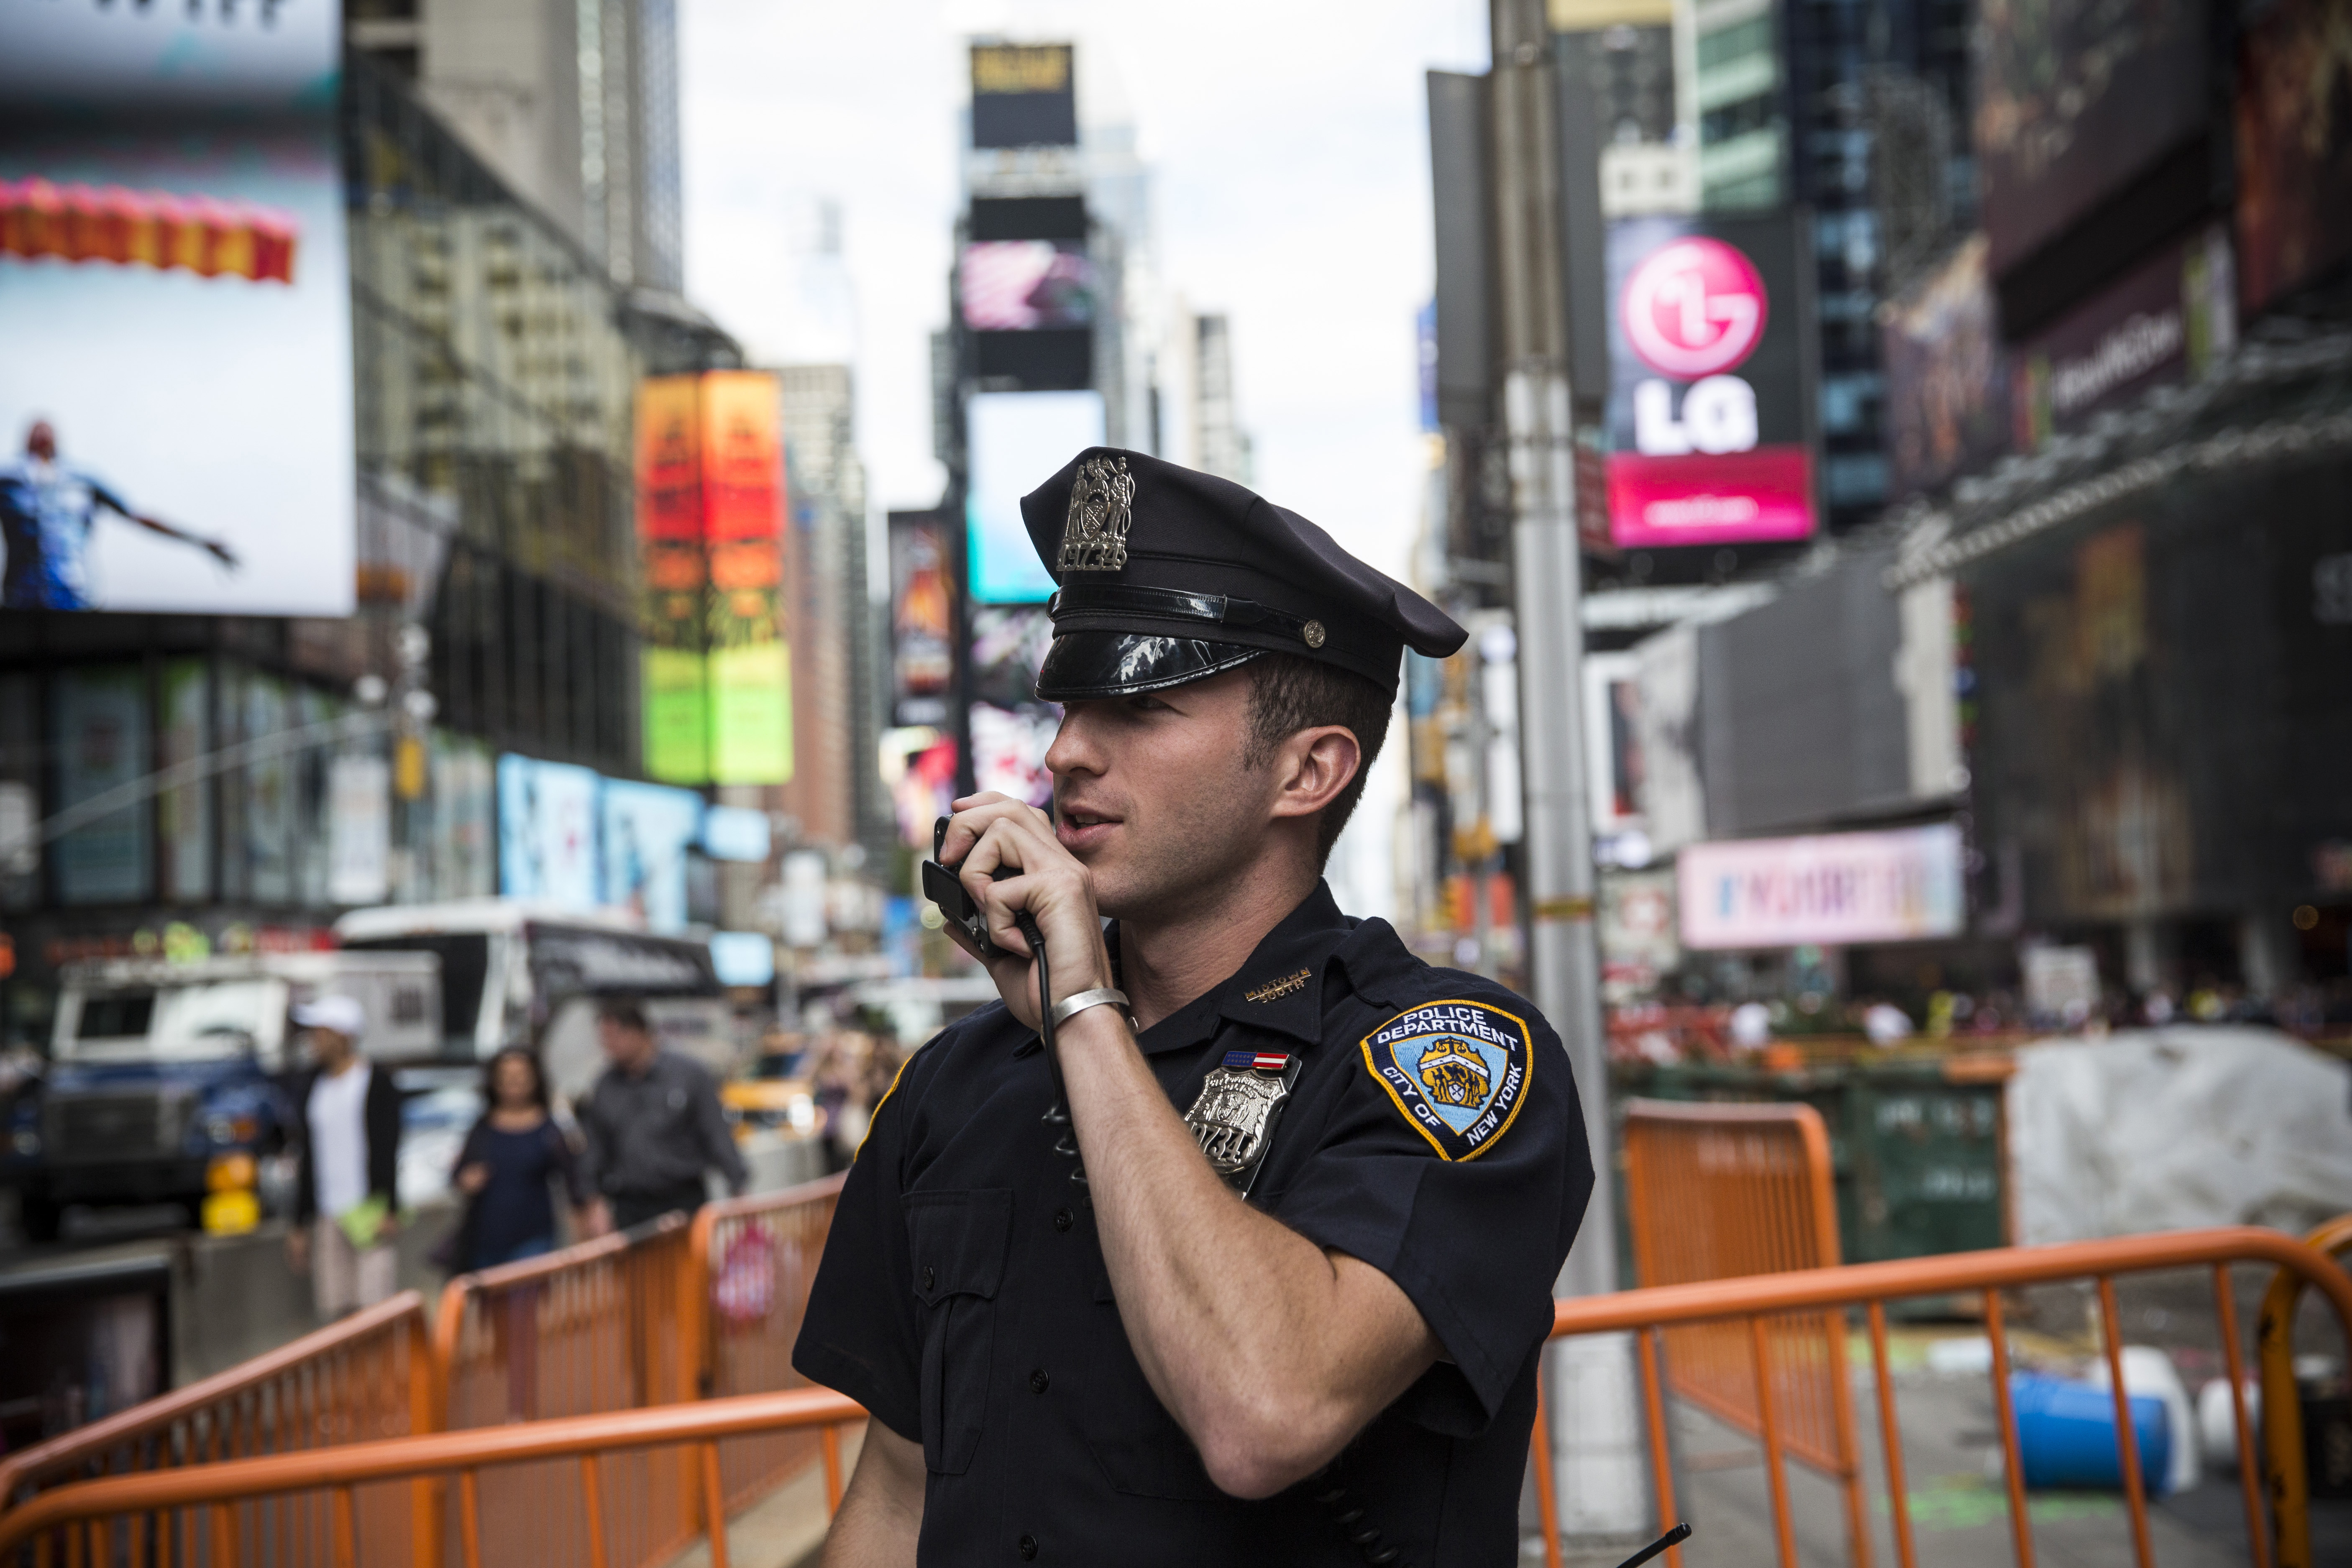 NYC police,NYPD,NYPD camera,THE EPOCH TIMES.